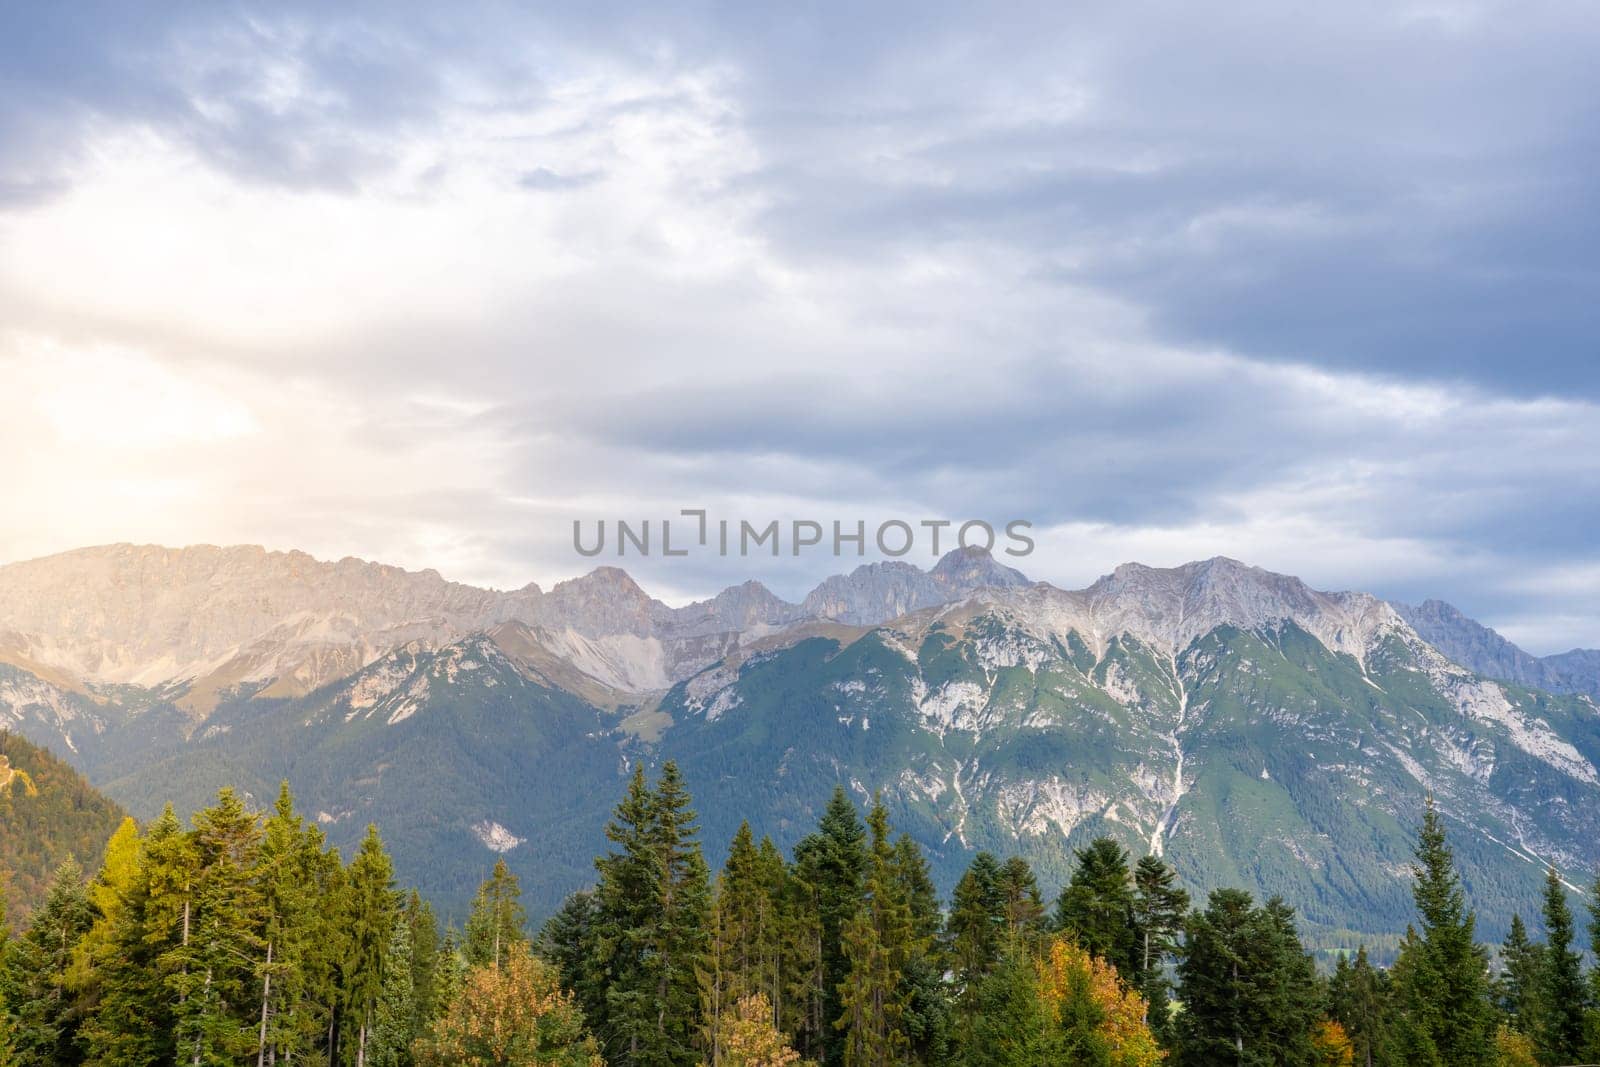 Wallpaper of a mountain landscape at sunset. High quality photo